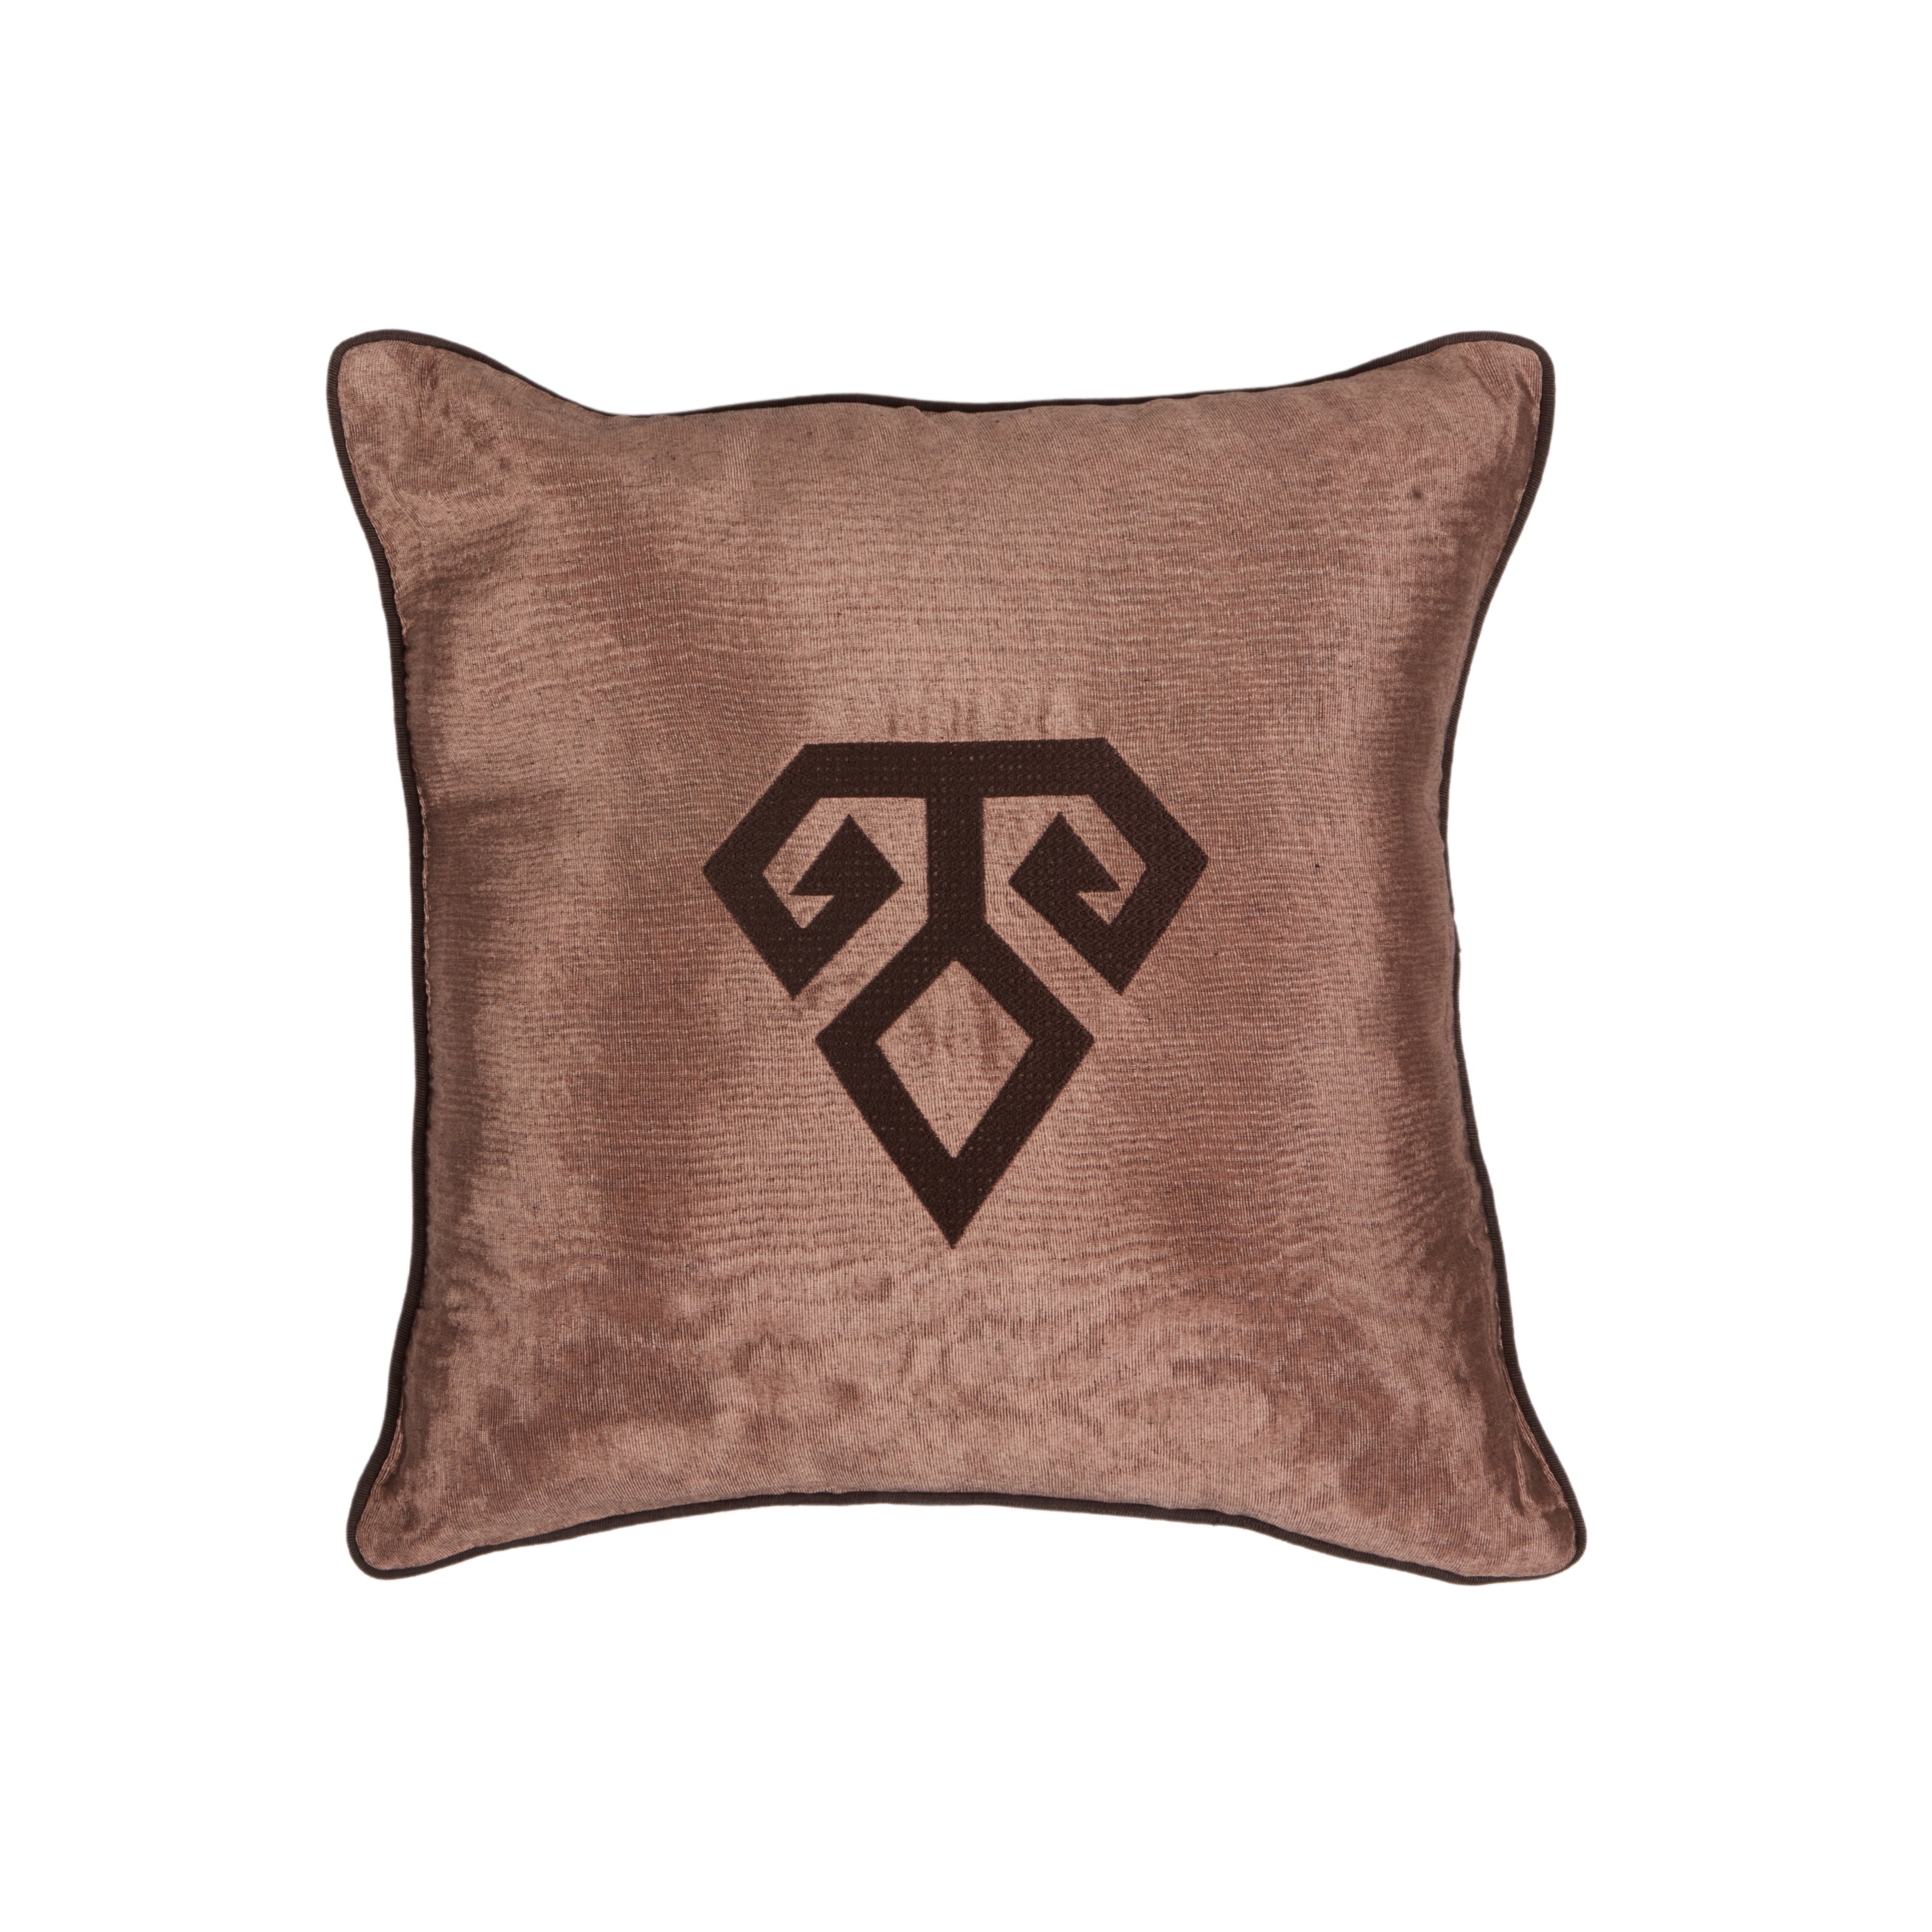 Kutnu Silk Pillow with Embroidery - Fertility , Light Brown Authentic Silk Cushion